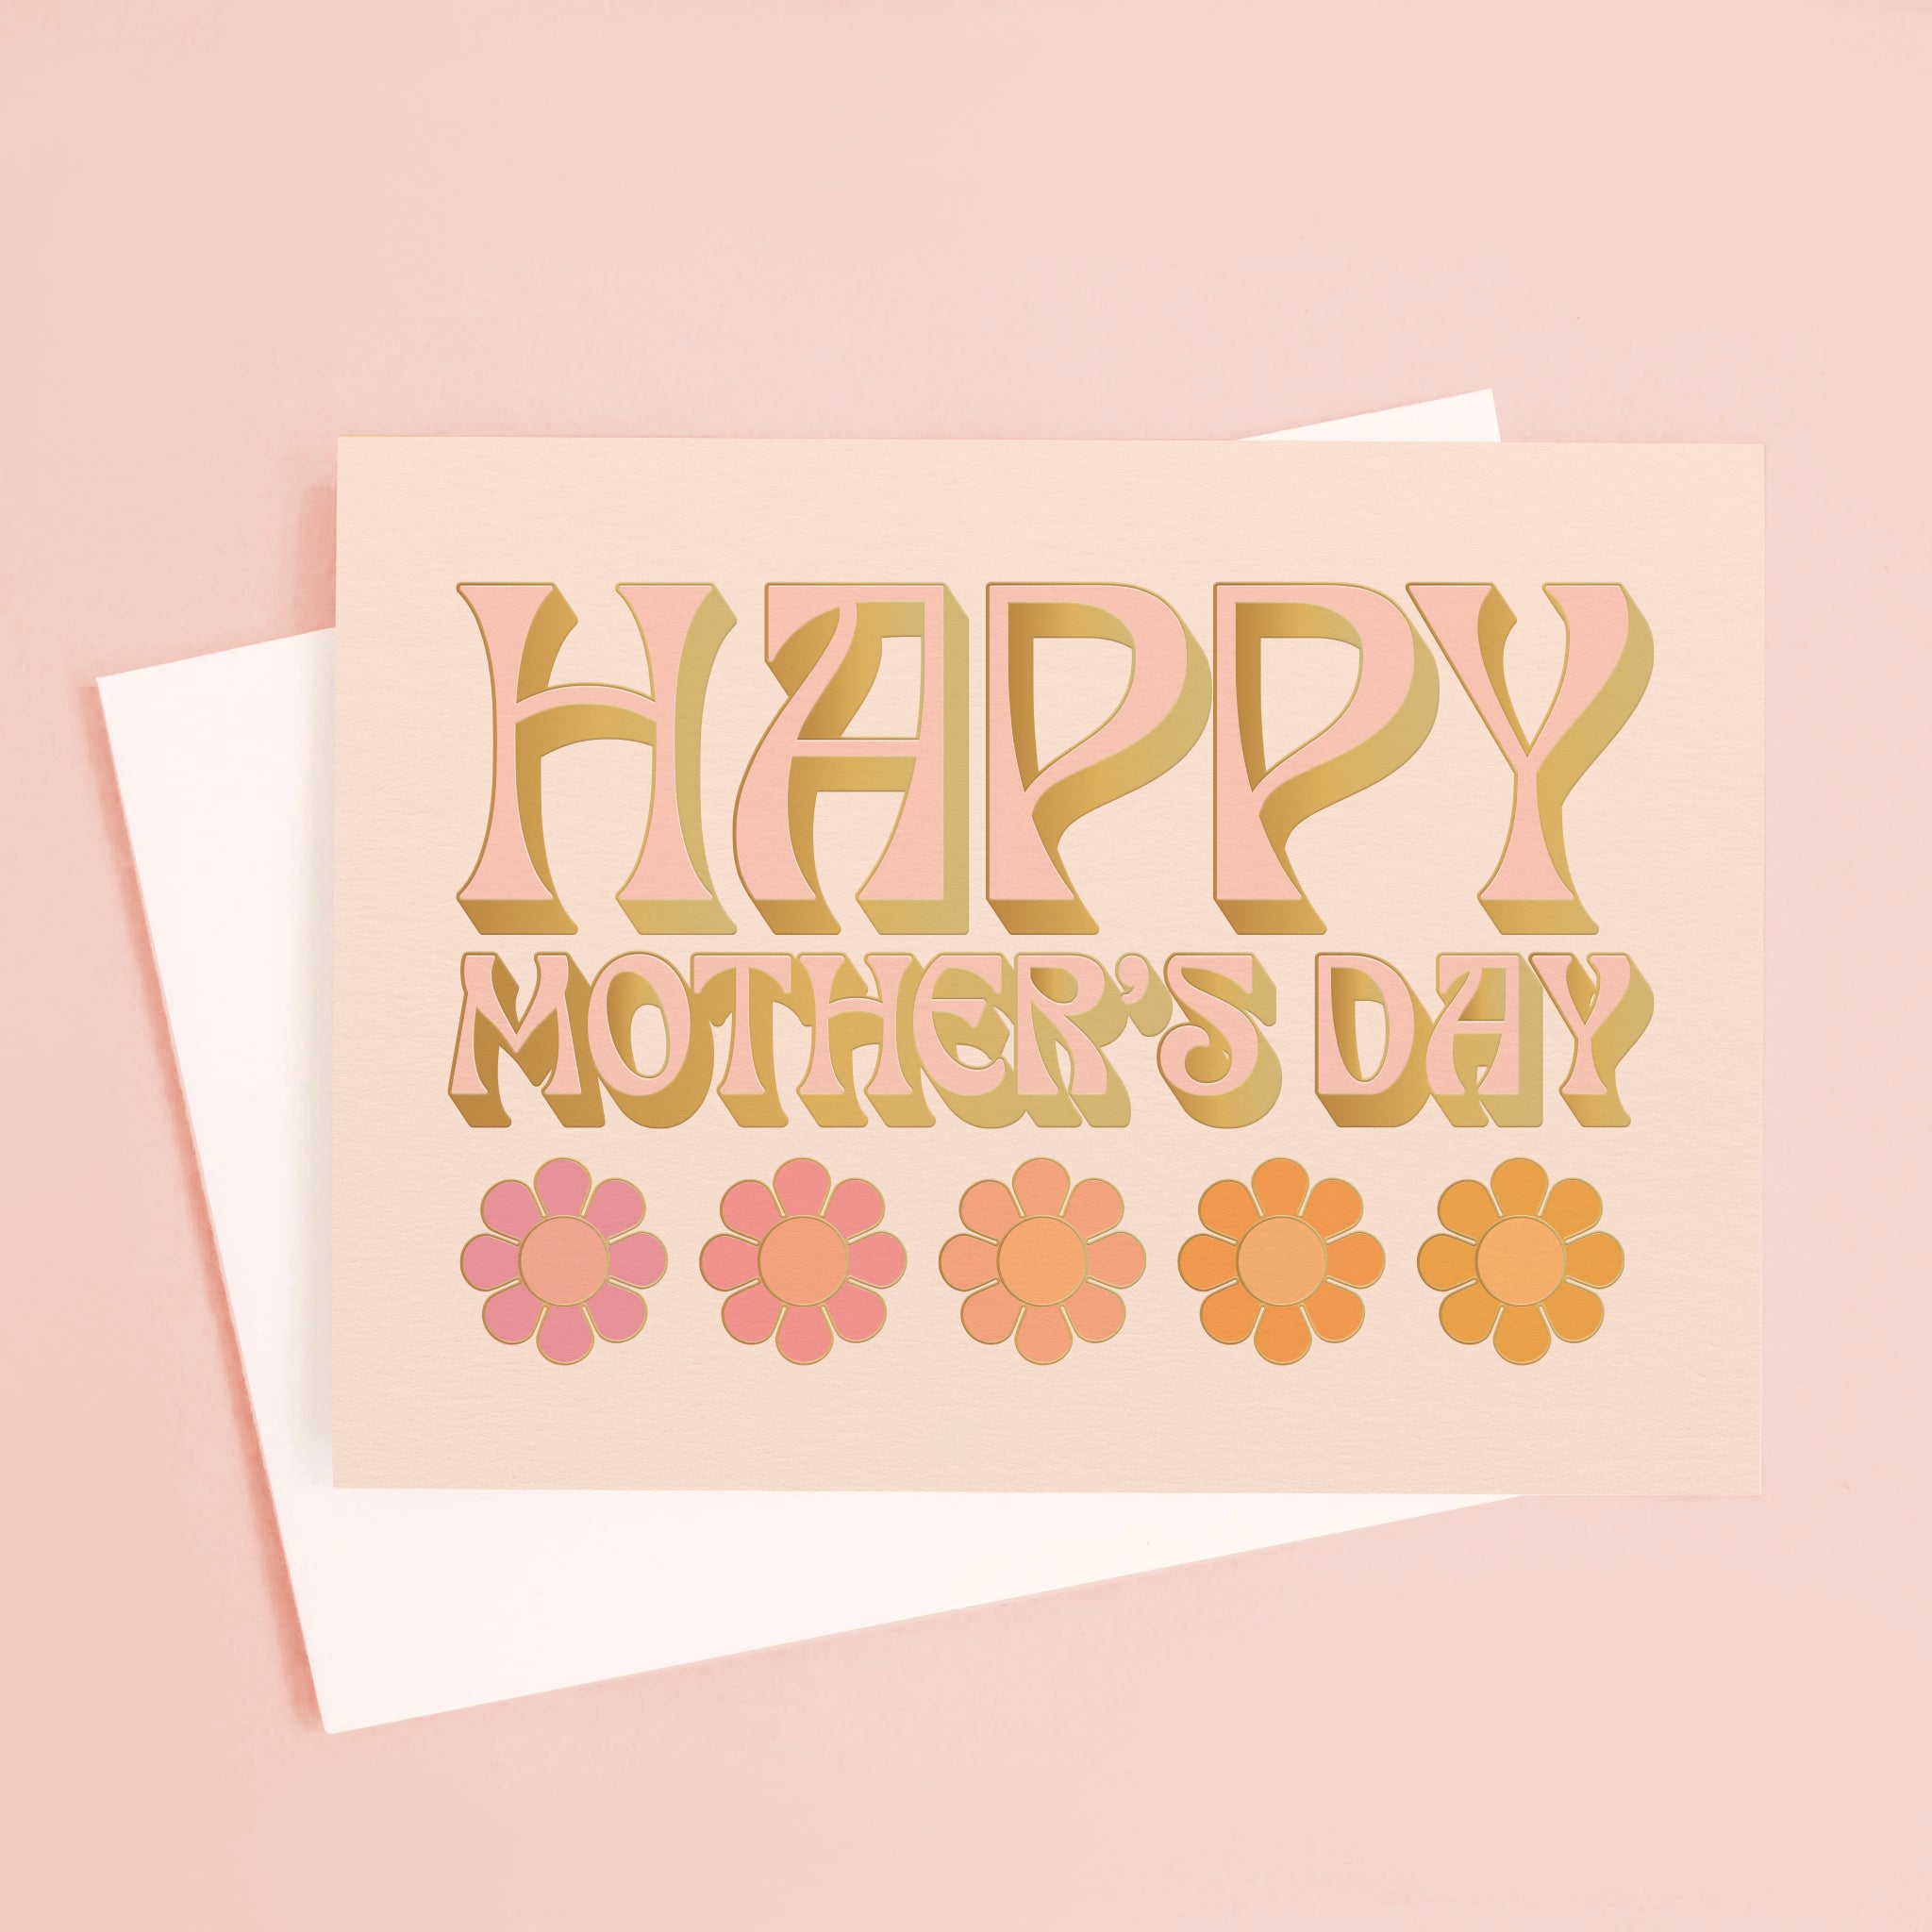 On a peachy background is a light pink card that reads, "Happy Mother's Day" with five daisies underneath. 